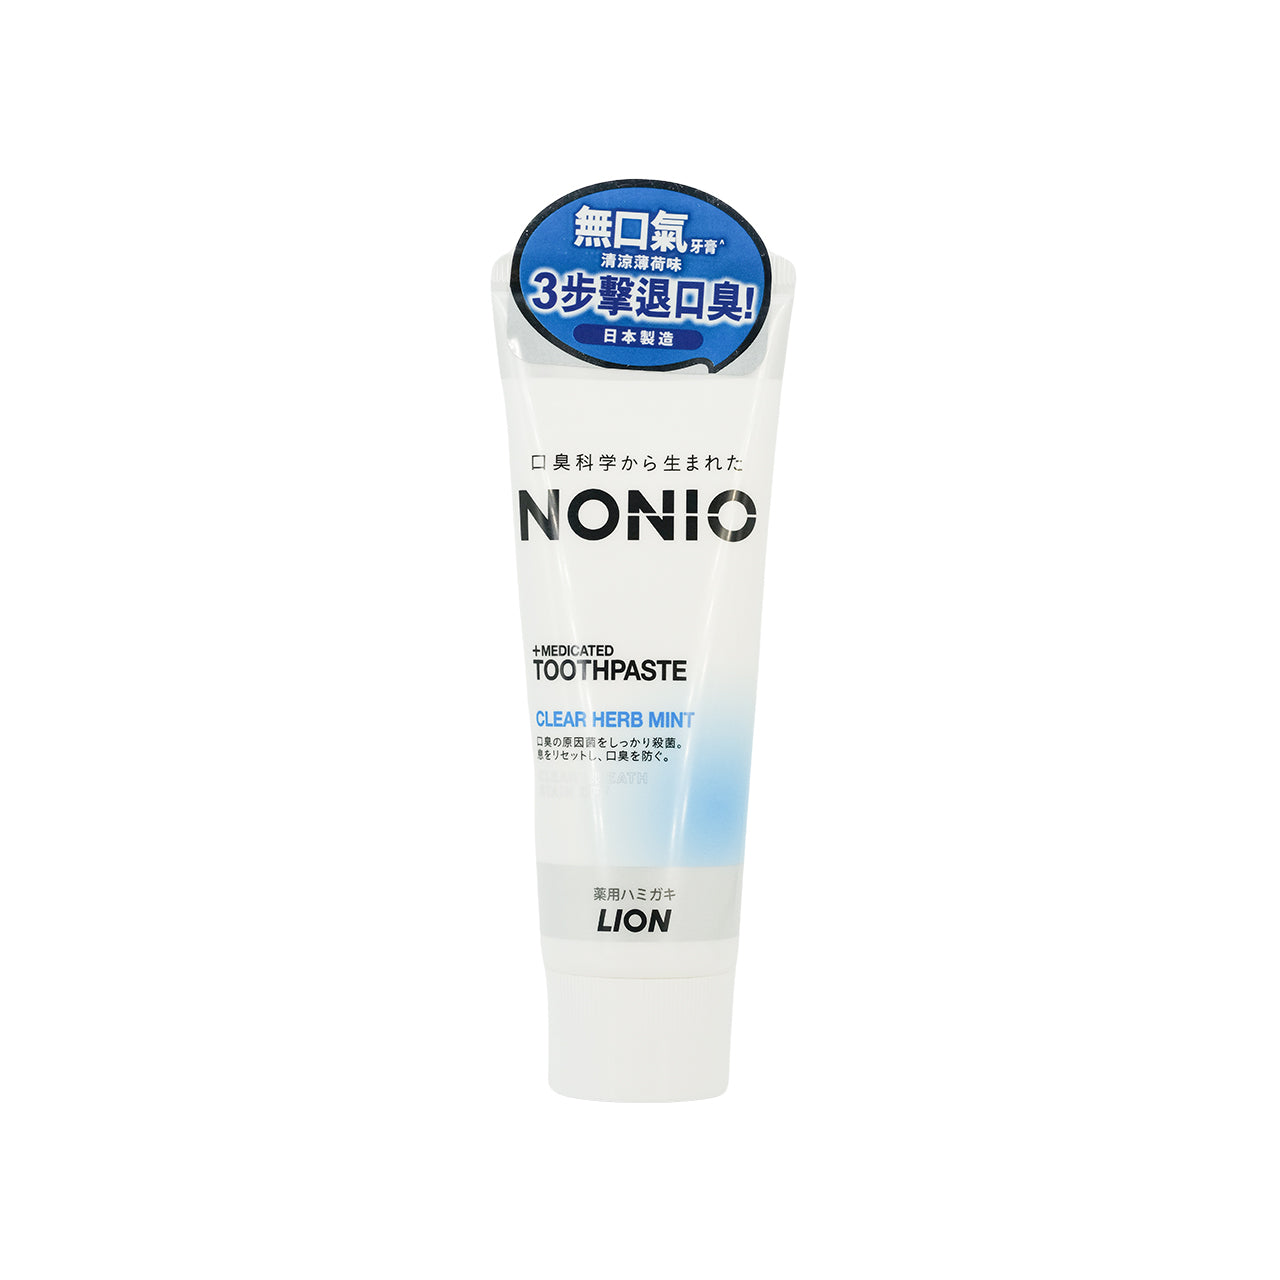 Lion Nonio Toothpaste Clear Herb Mint 130g